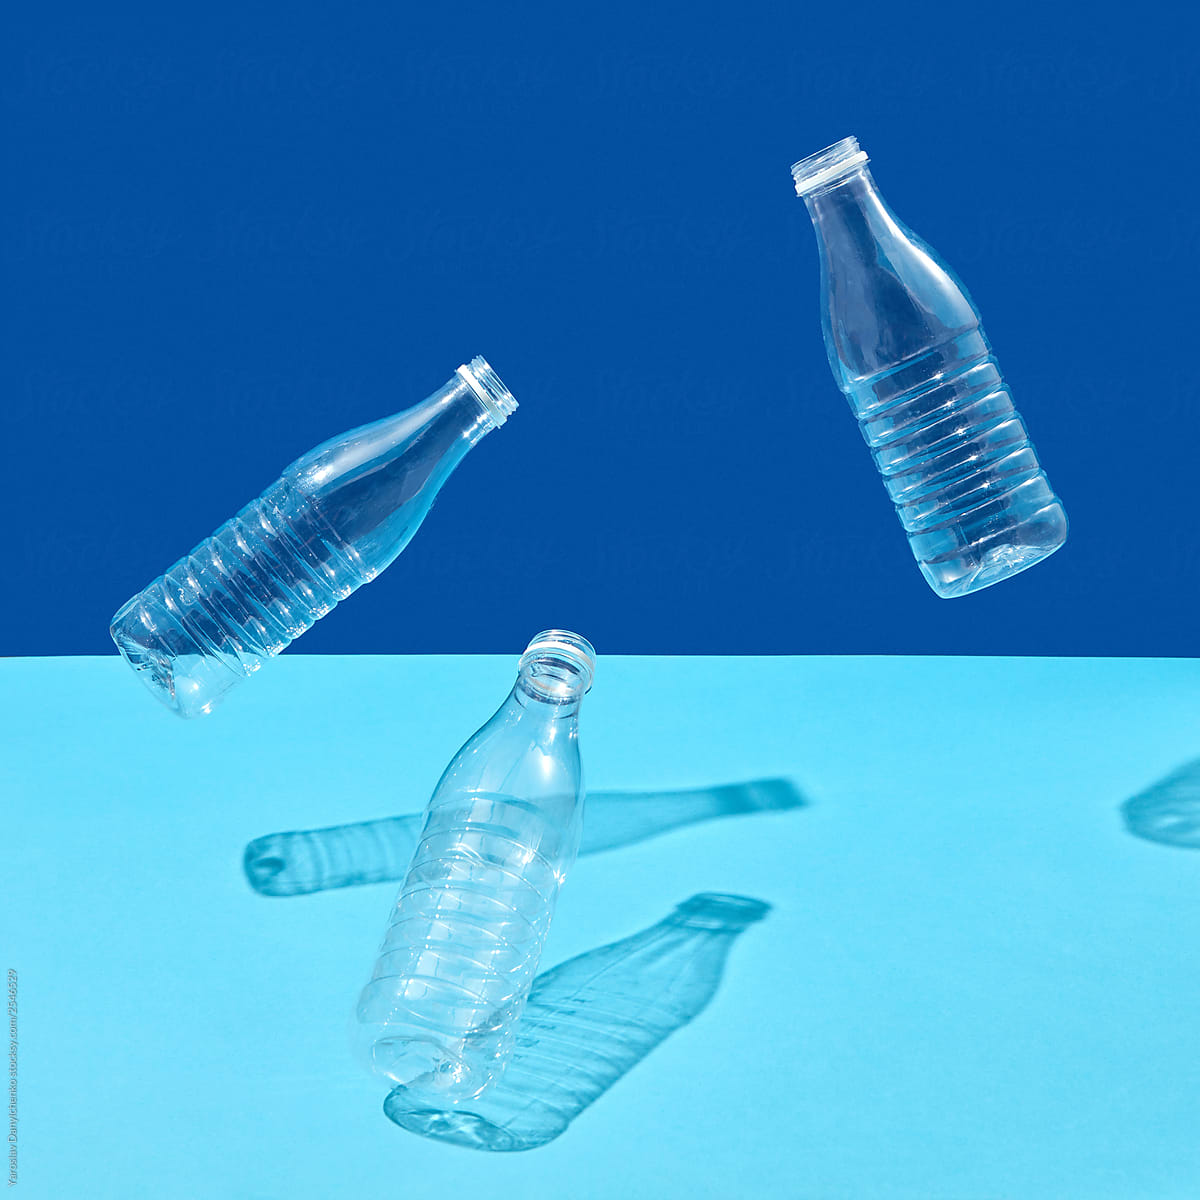 Plastic bottle mock up Images - Search Images on Everypixel